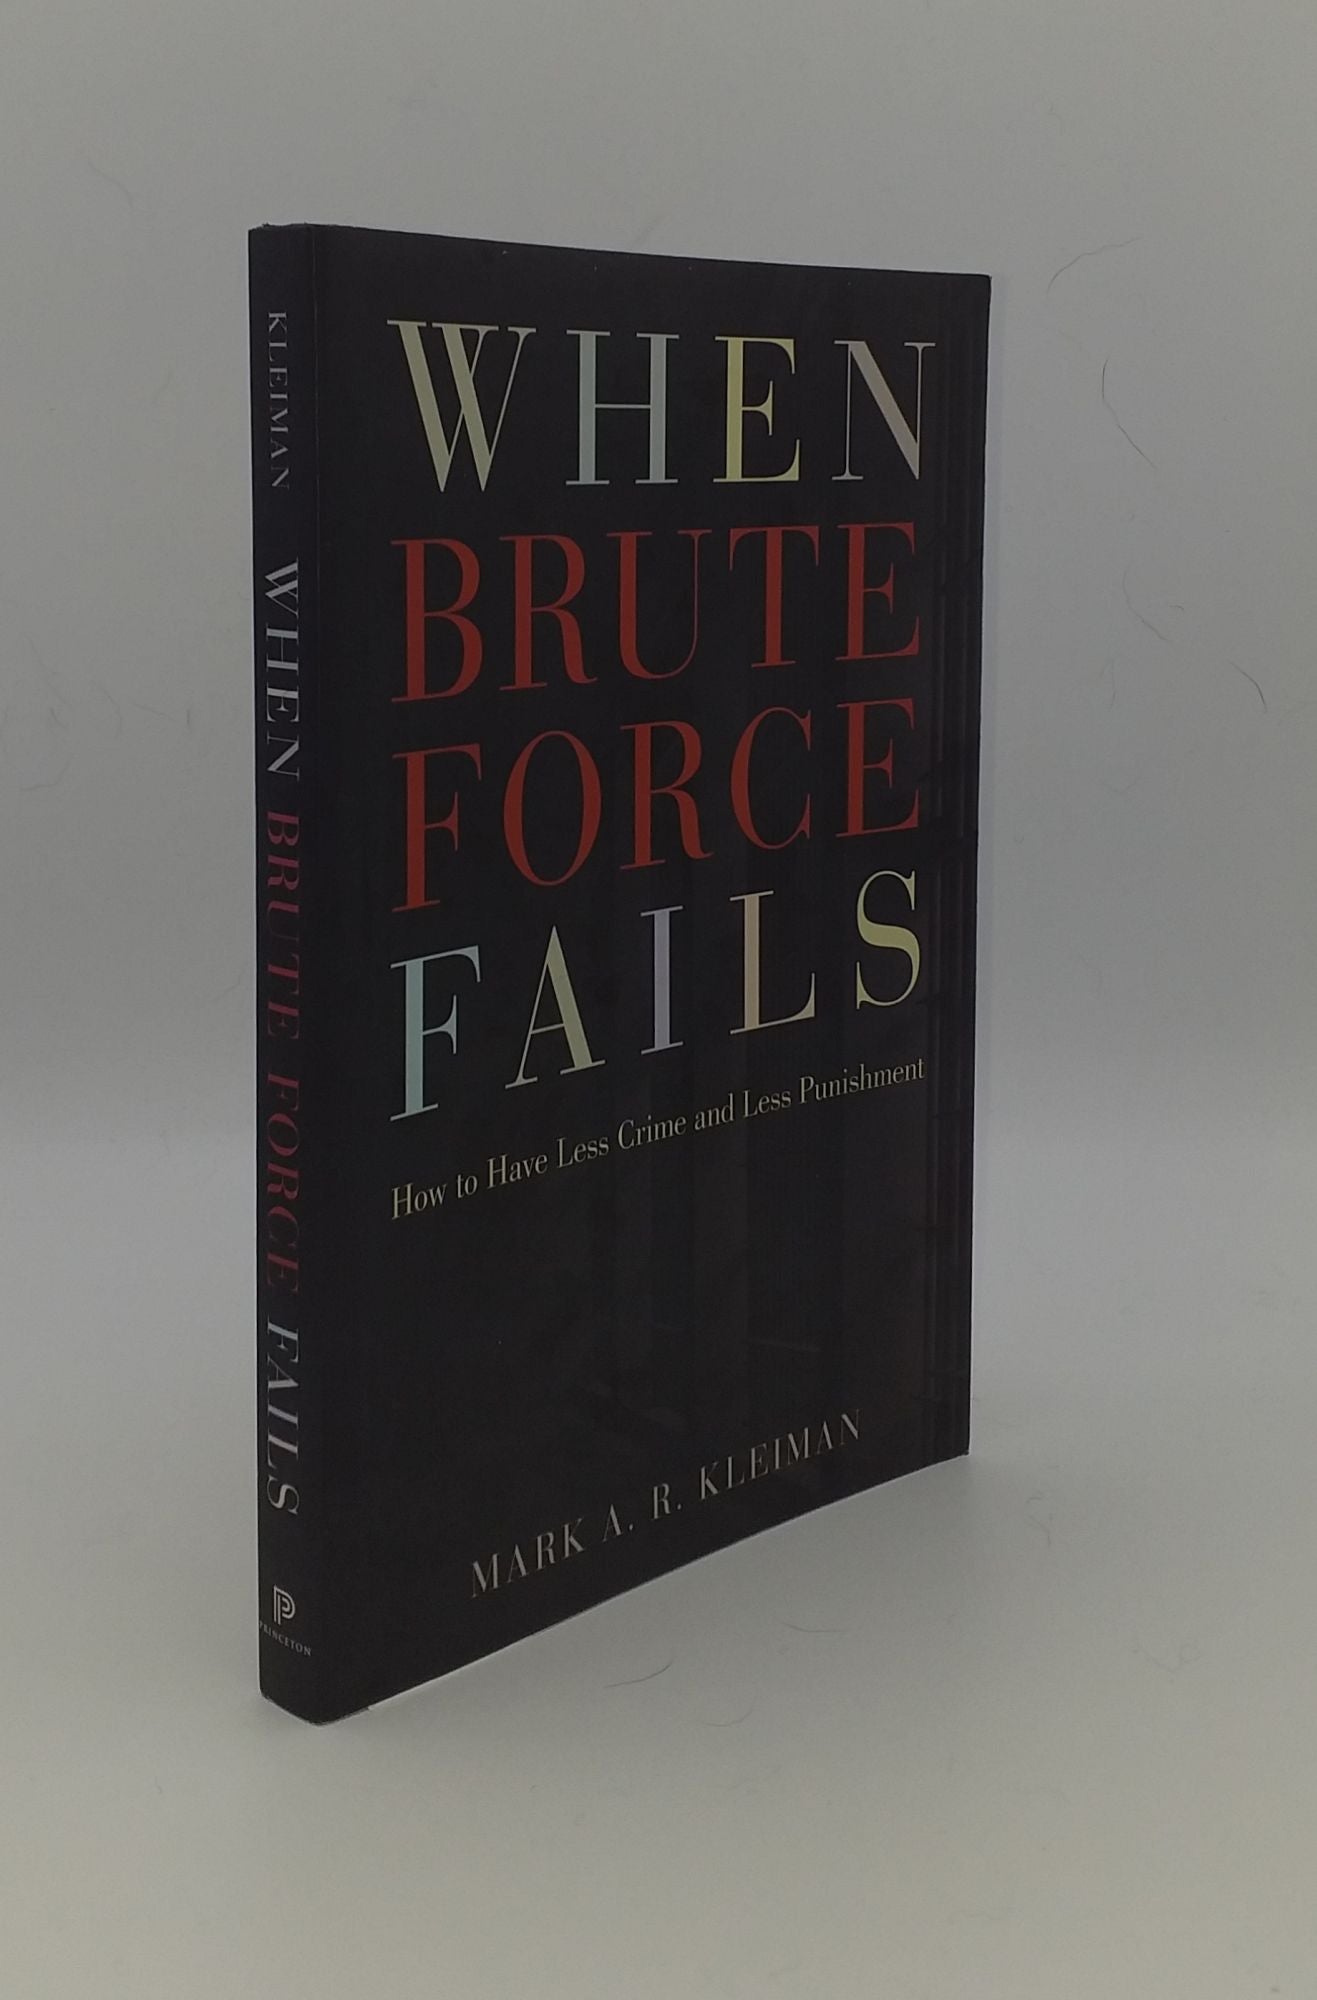 KLEIMAN Mark A. - When Brute Force Fails How to Have Less Crime and Less Punishment